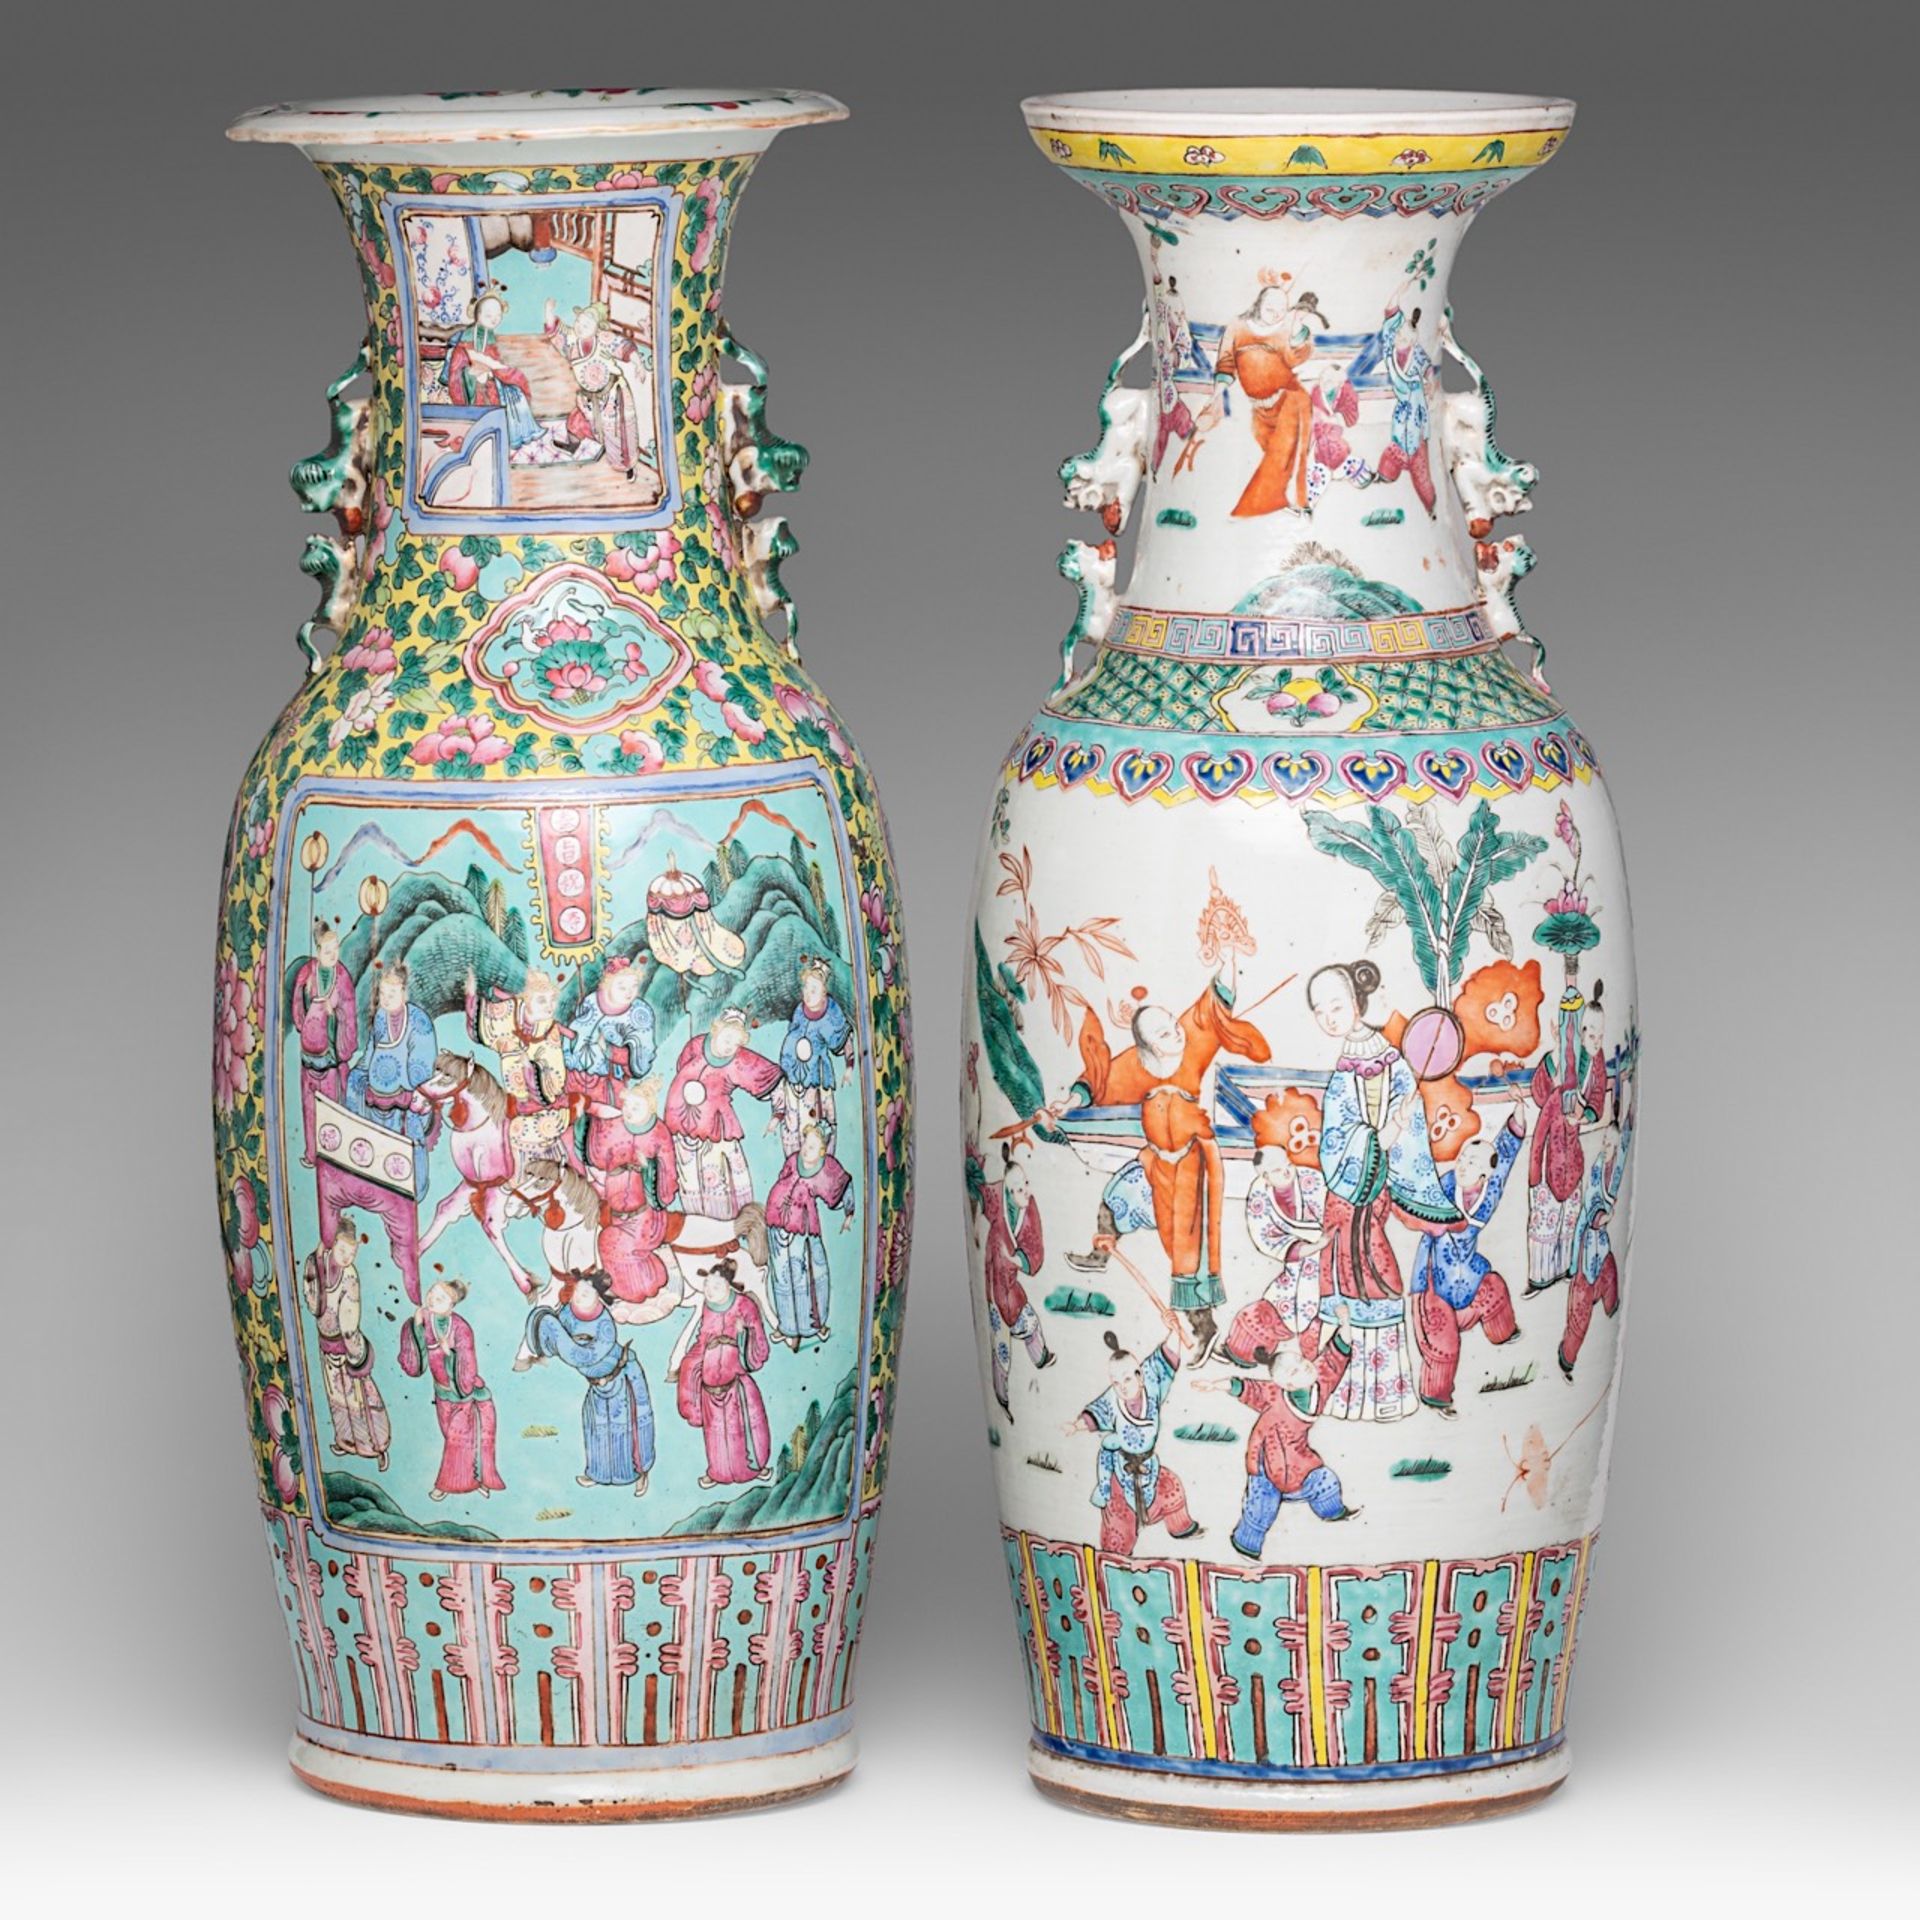 Two Chinese famille rose 'Figural' vases, late 19thC, H 61,5 cm